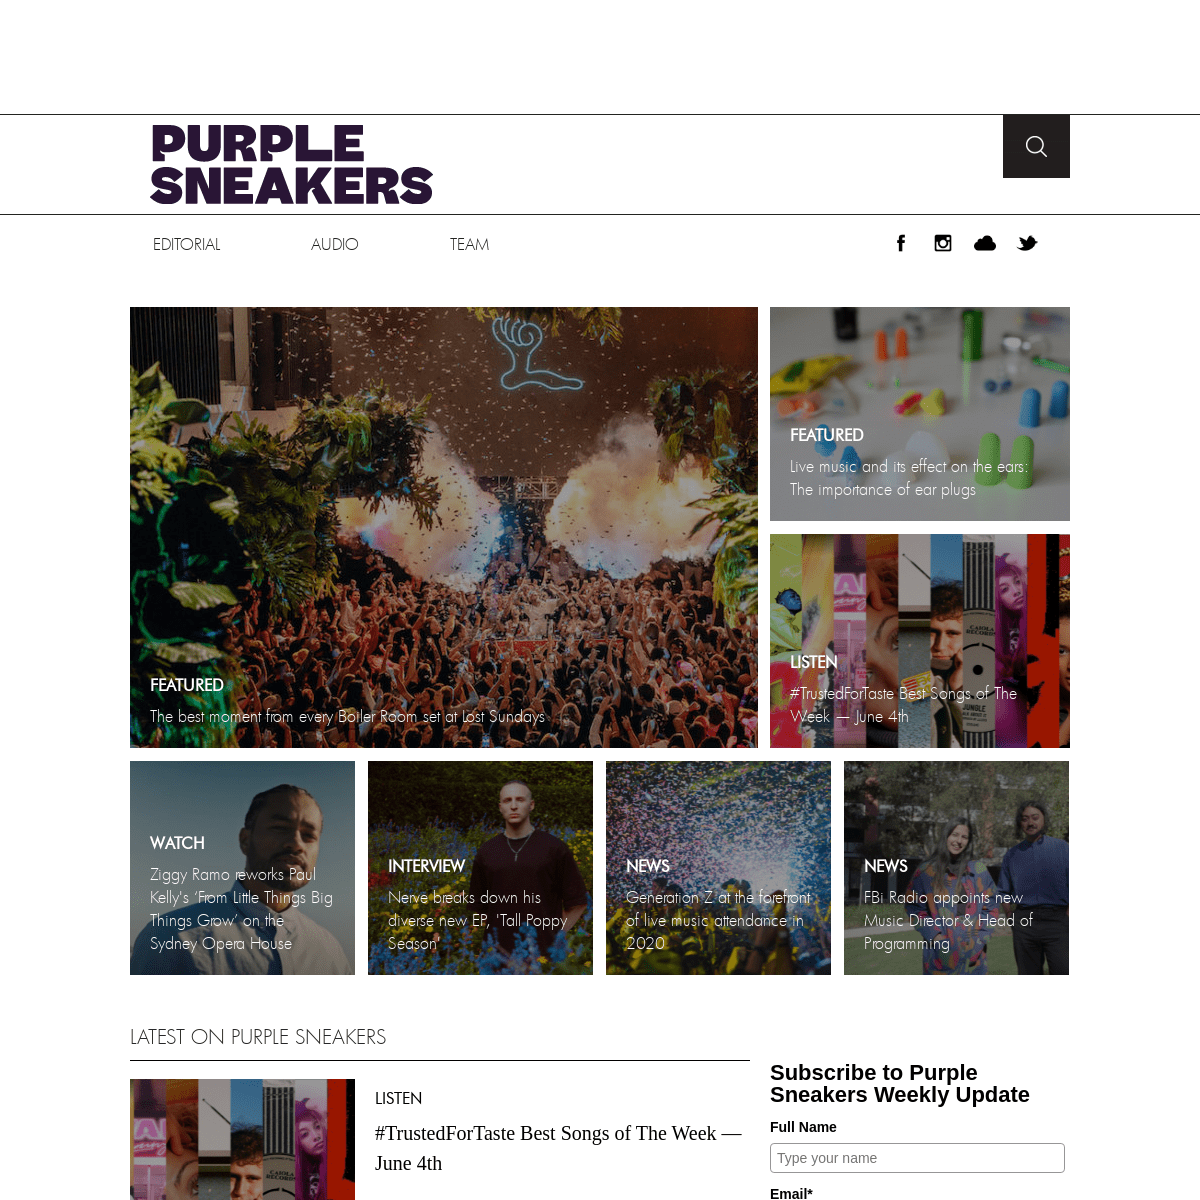 A complete backup of https://purplesneakers.com.au